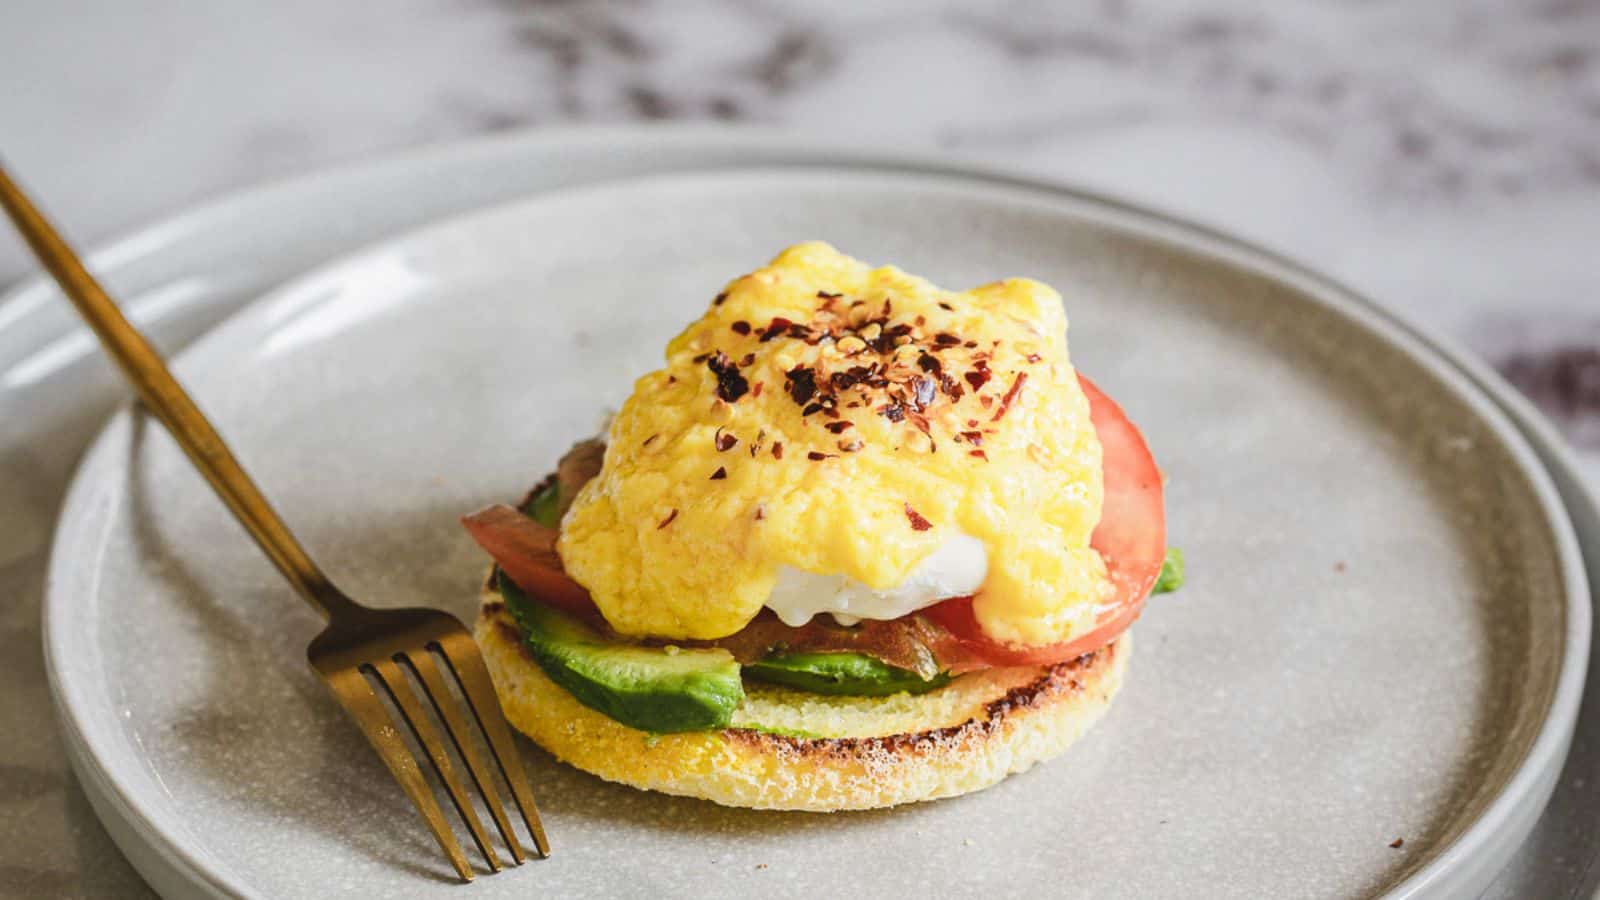 Meatless and Vegetarian Eggs Benedict Recipe with Avocado (Gluten free option!).